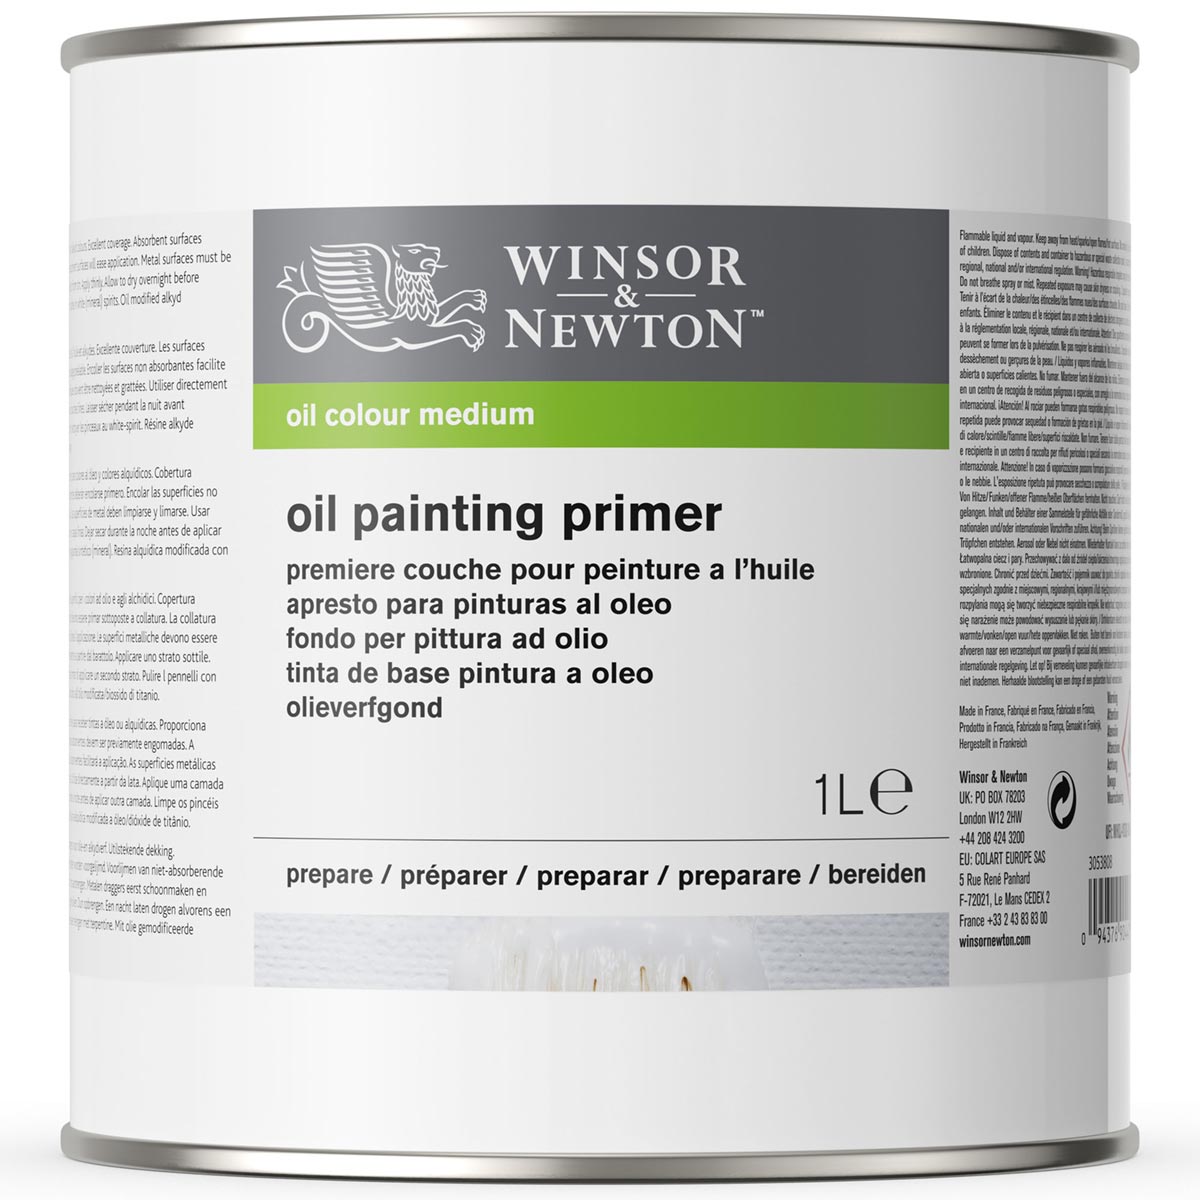 Winsor and Newton - Oil Painting Primer - 1 Litre